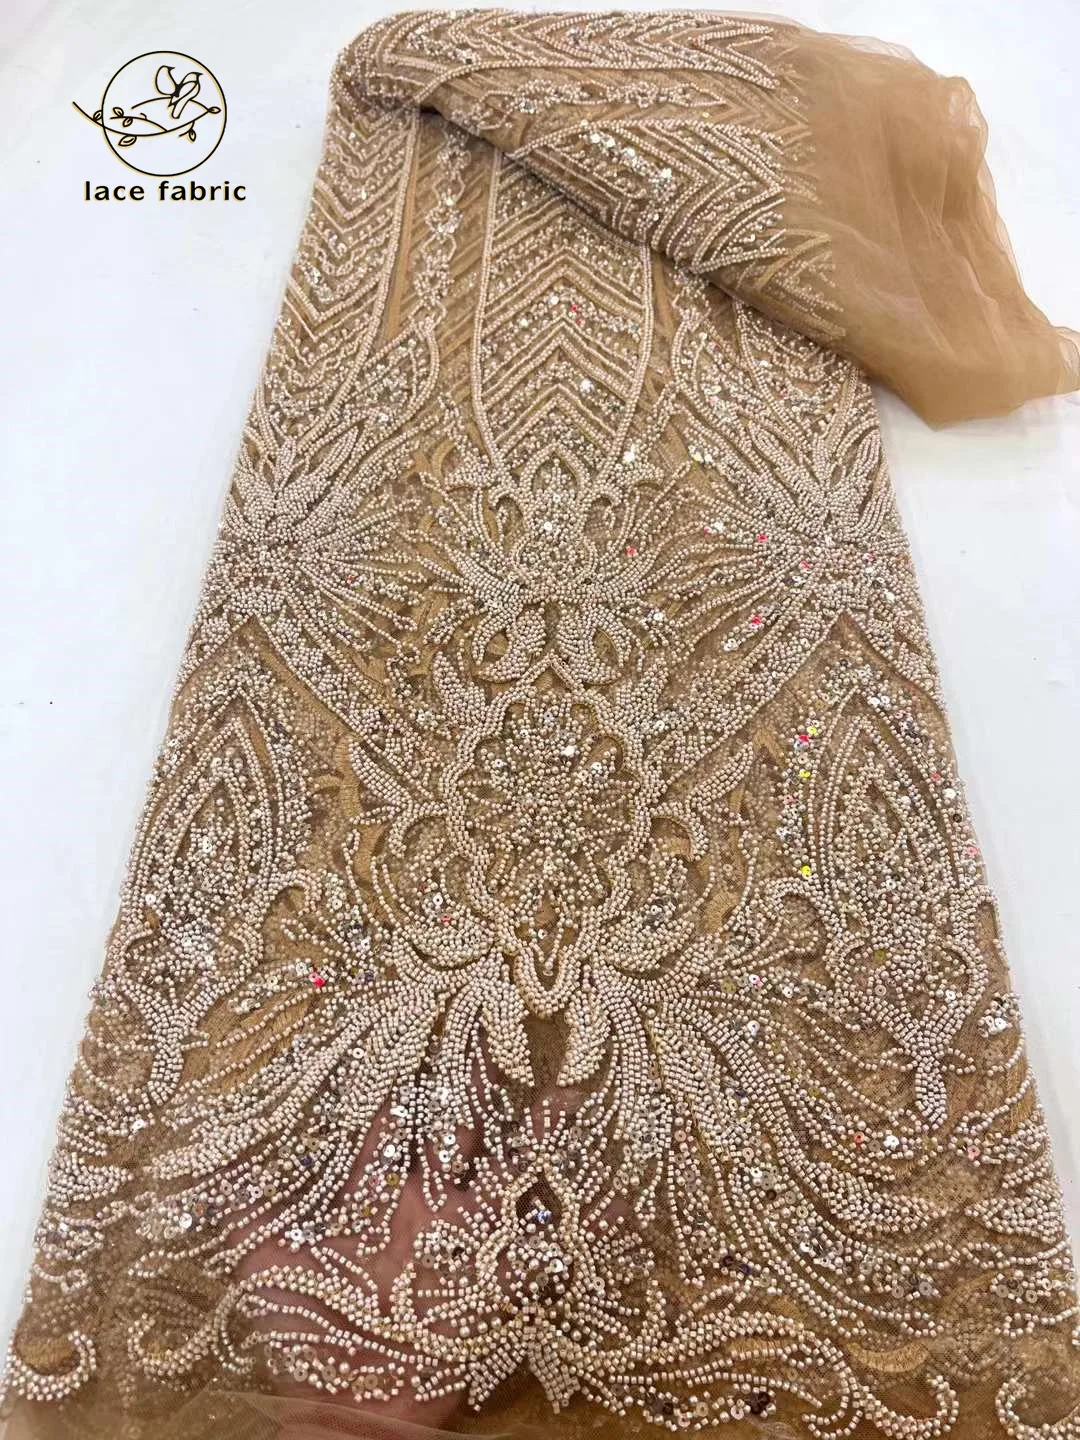 High -End Luxury French Mesh Beaded Lace Fabric 2023 High Quality African Sequins Groom Lace Fabrics For Nigerian Wedding Dress latest royal african lace fabric 2023 luxury french sequins mesh beads lace fabric high end handmade beaded for wedding dress